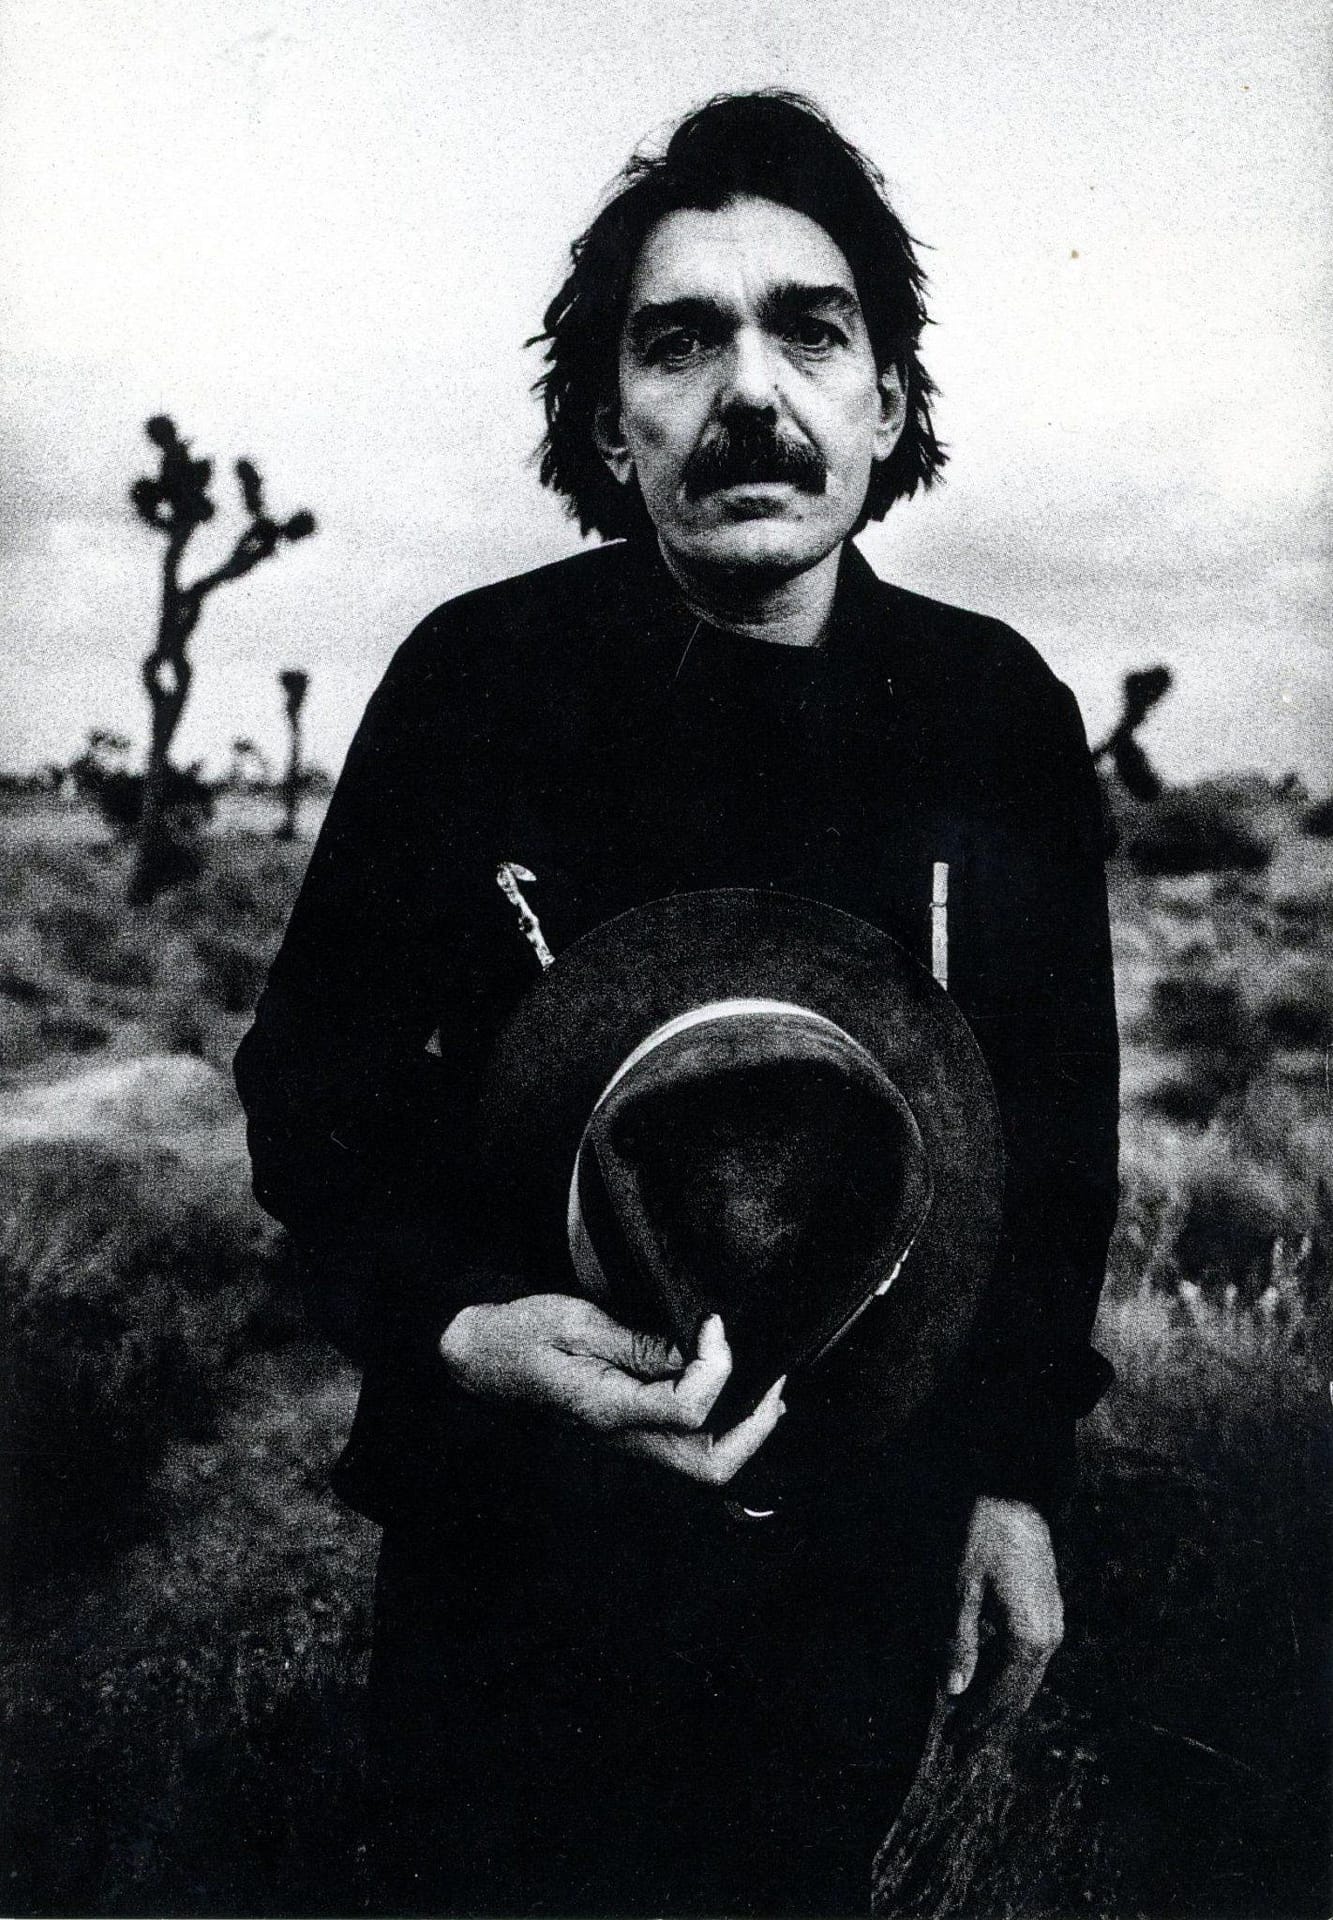 A classic B&W photo of Don van Vliet (Captain Beefheart) by photographer Anton Corbijn taken in the Mojave desert. He's holding one of his wide-brimmed hats against his chest, eyes sad, black hait, large dark moustache and bushy eyebrows, cacti thrusting up in the background with a boulder just behind him.